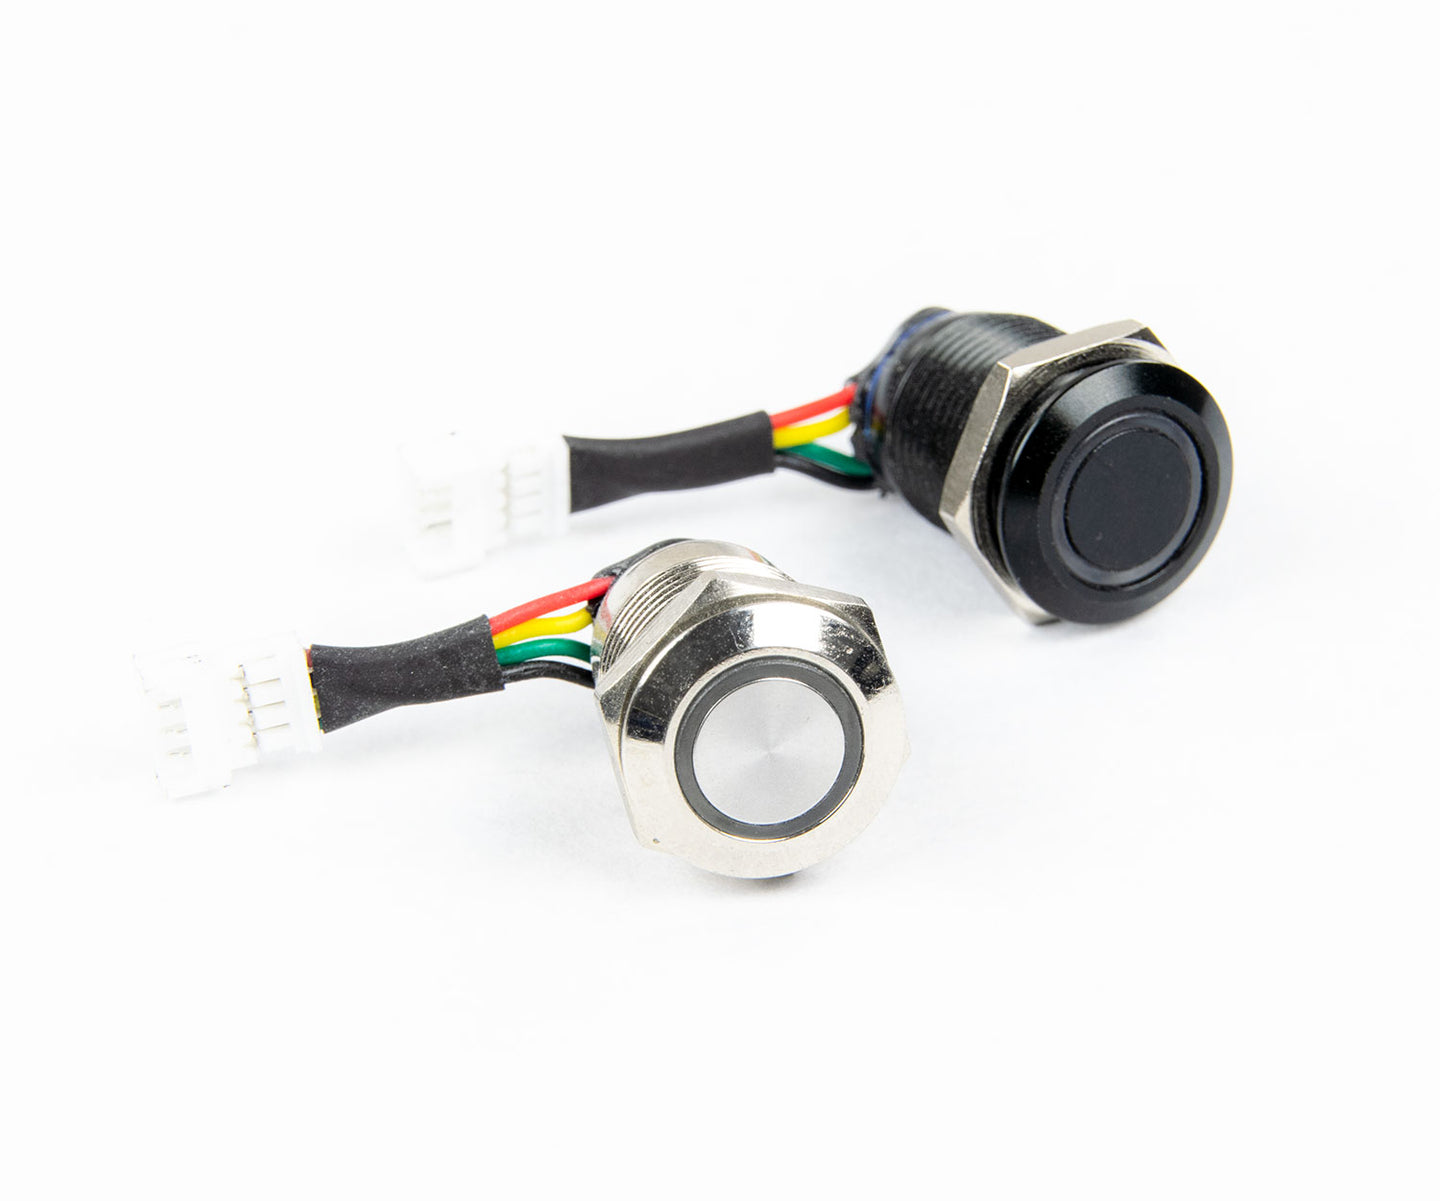 Plug and Play Ring Light Momentary Switch